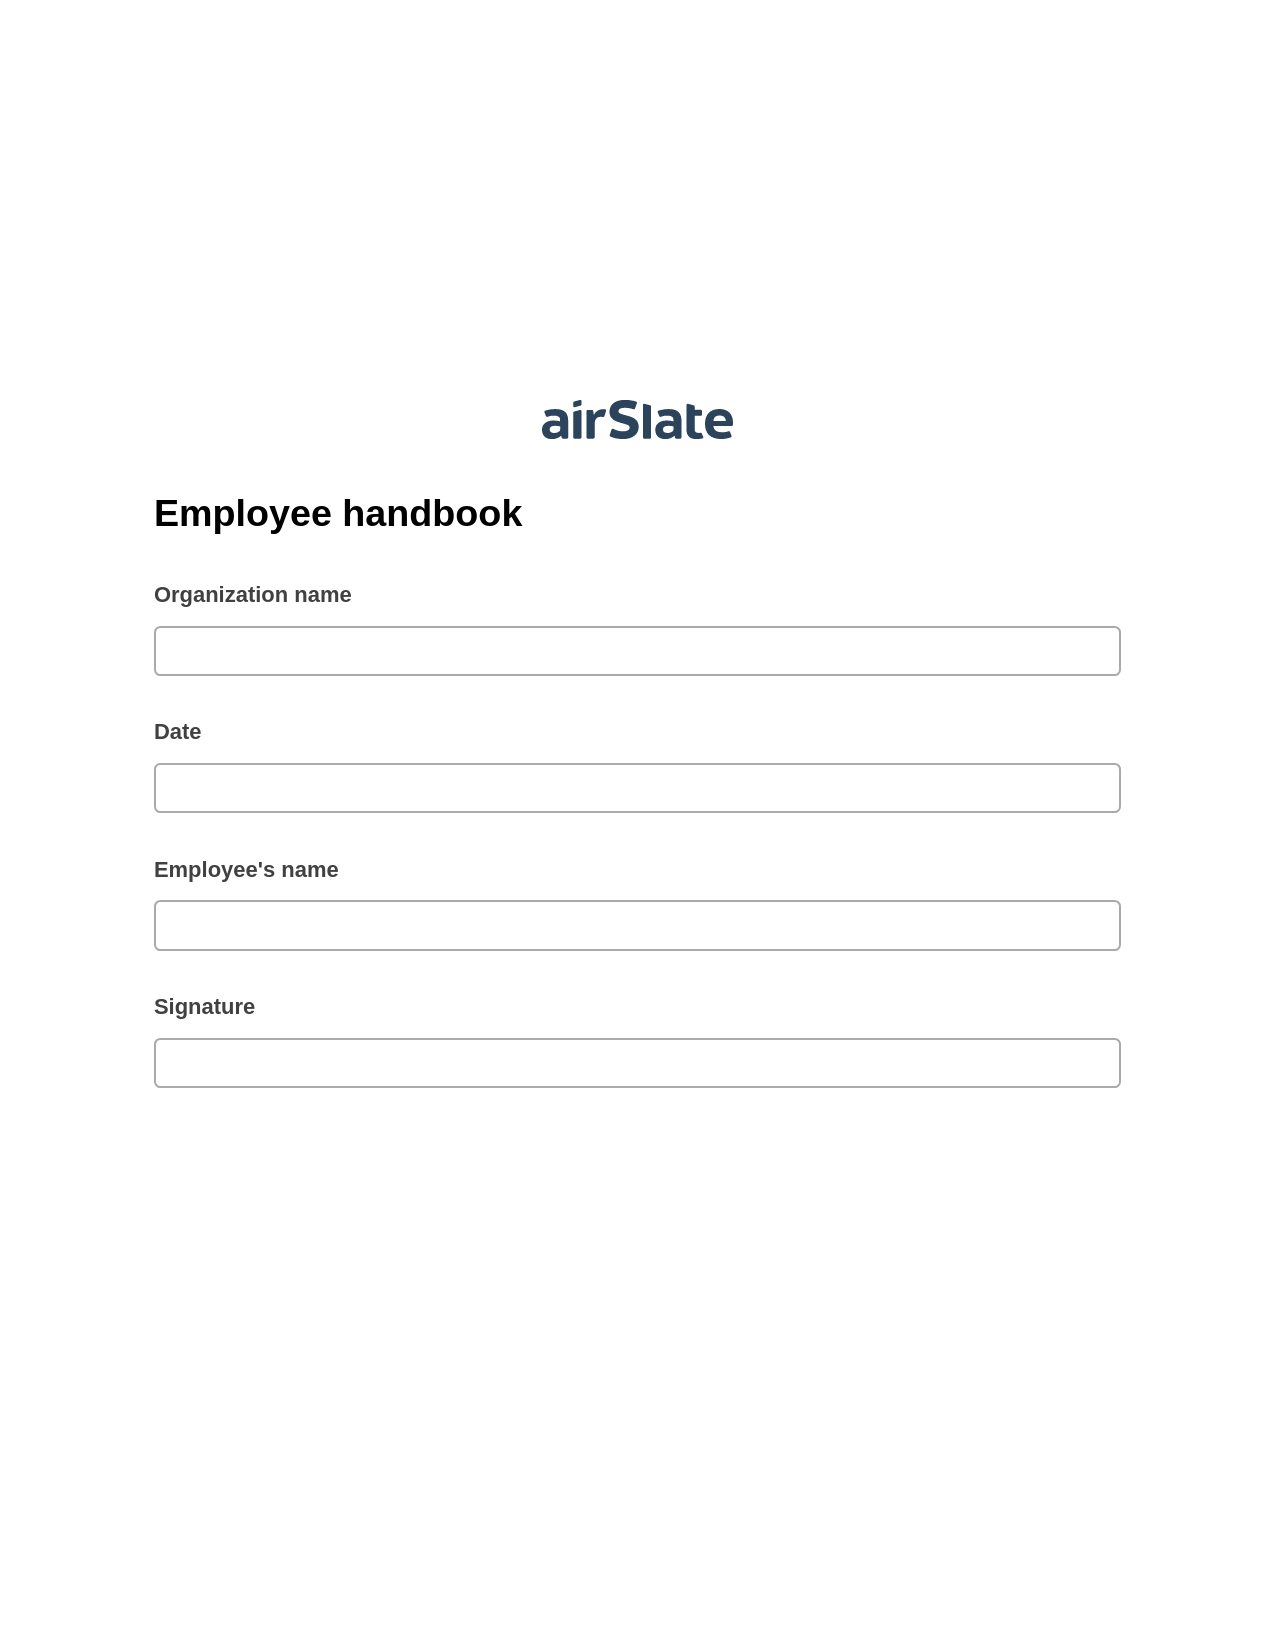 Multirole Employee handbook Pre-fill from Salesforce Records with SOQL Bot, Send Mailchimp Campaign Bot, Box Bot